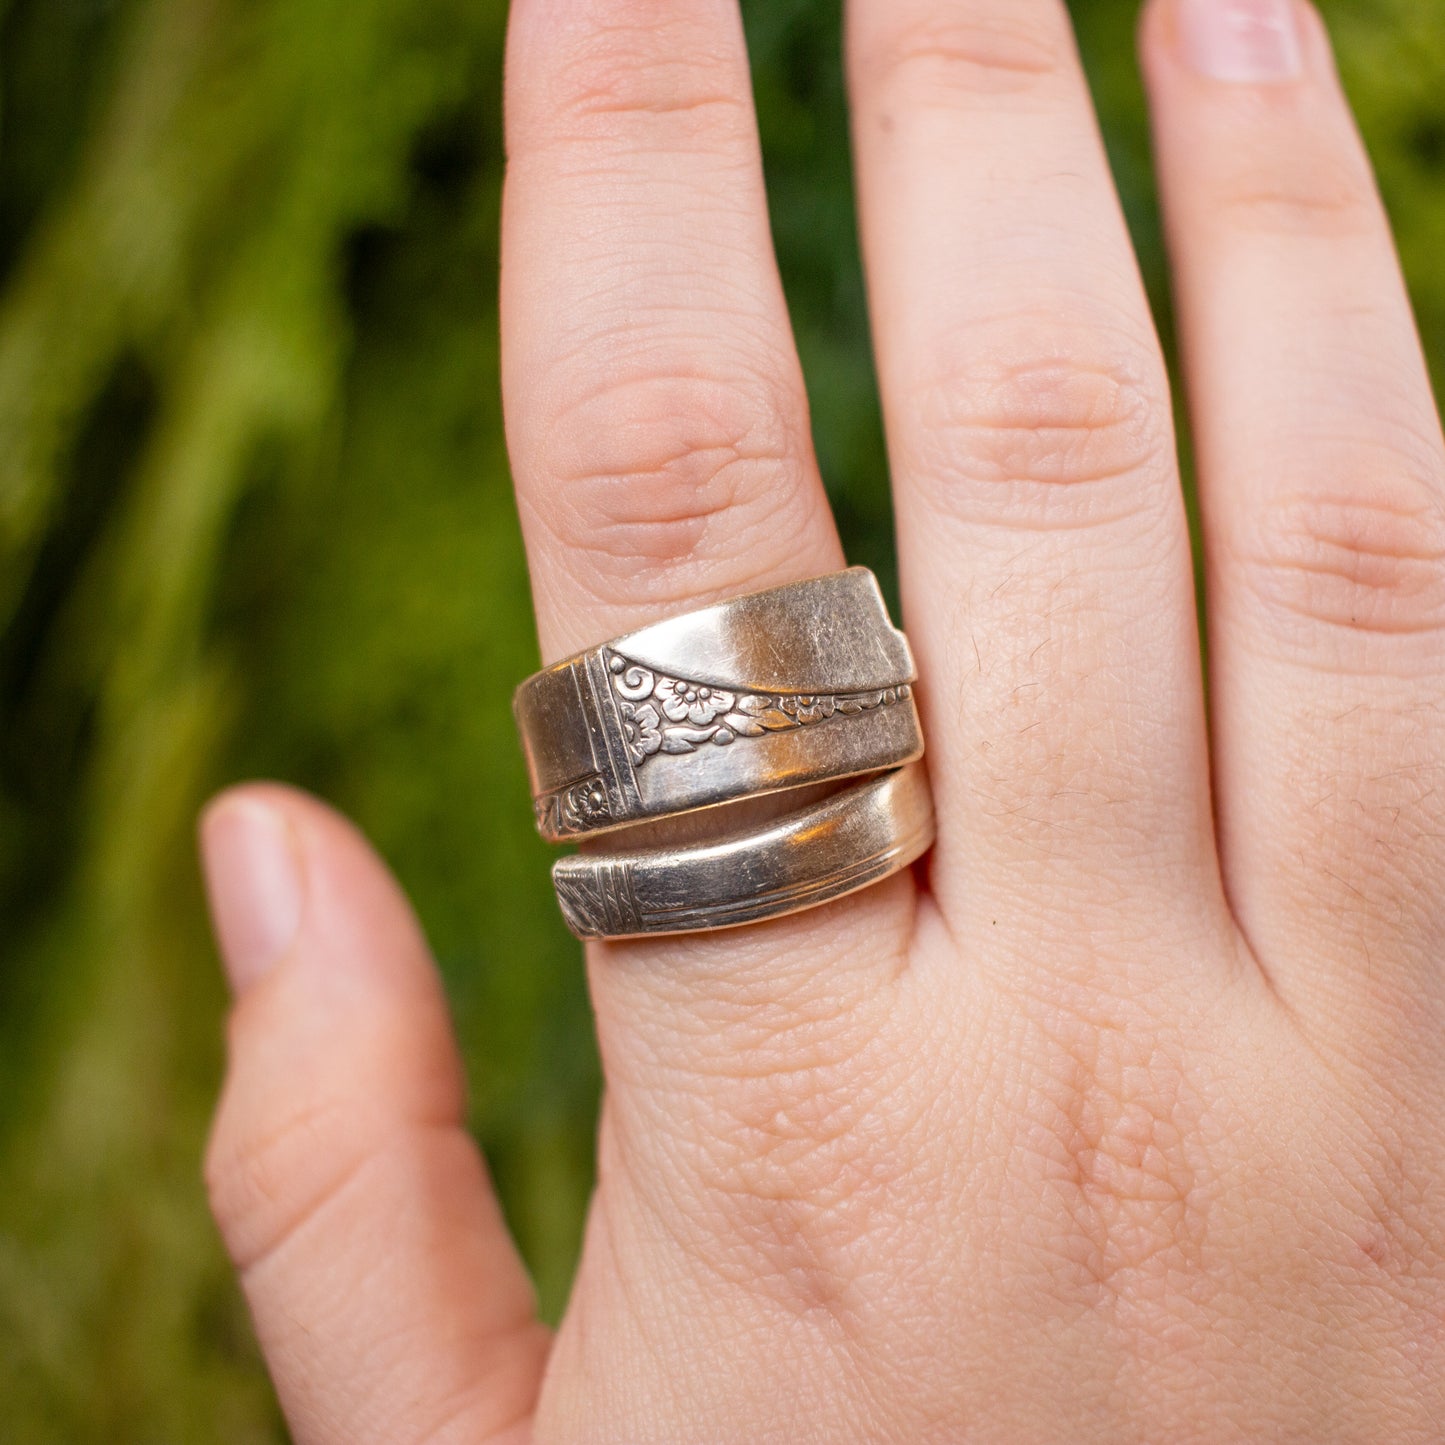 Caprice Wrapped Spoon Ring